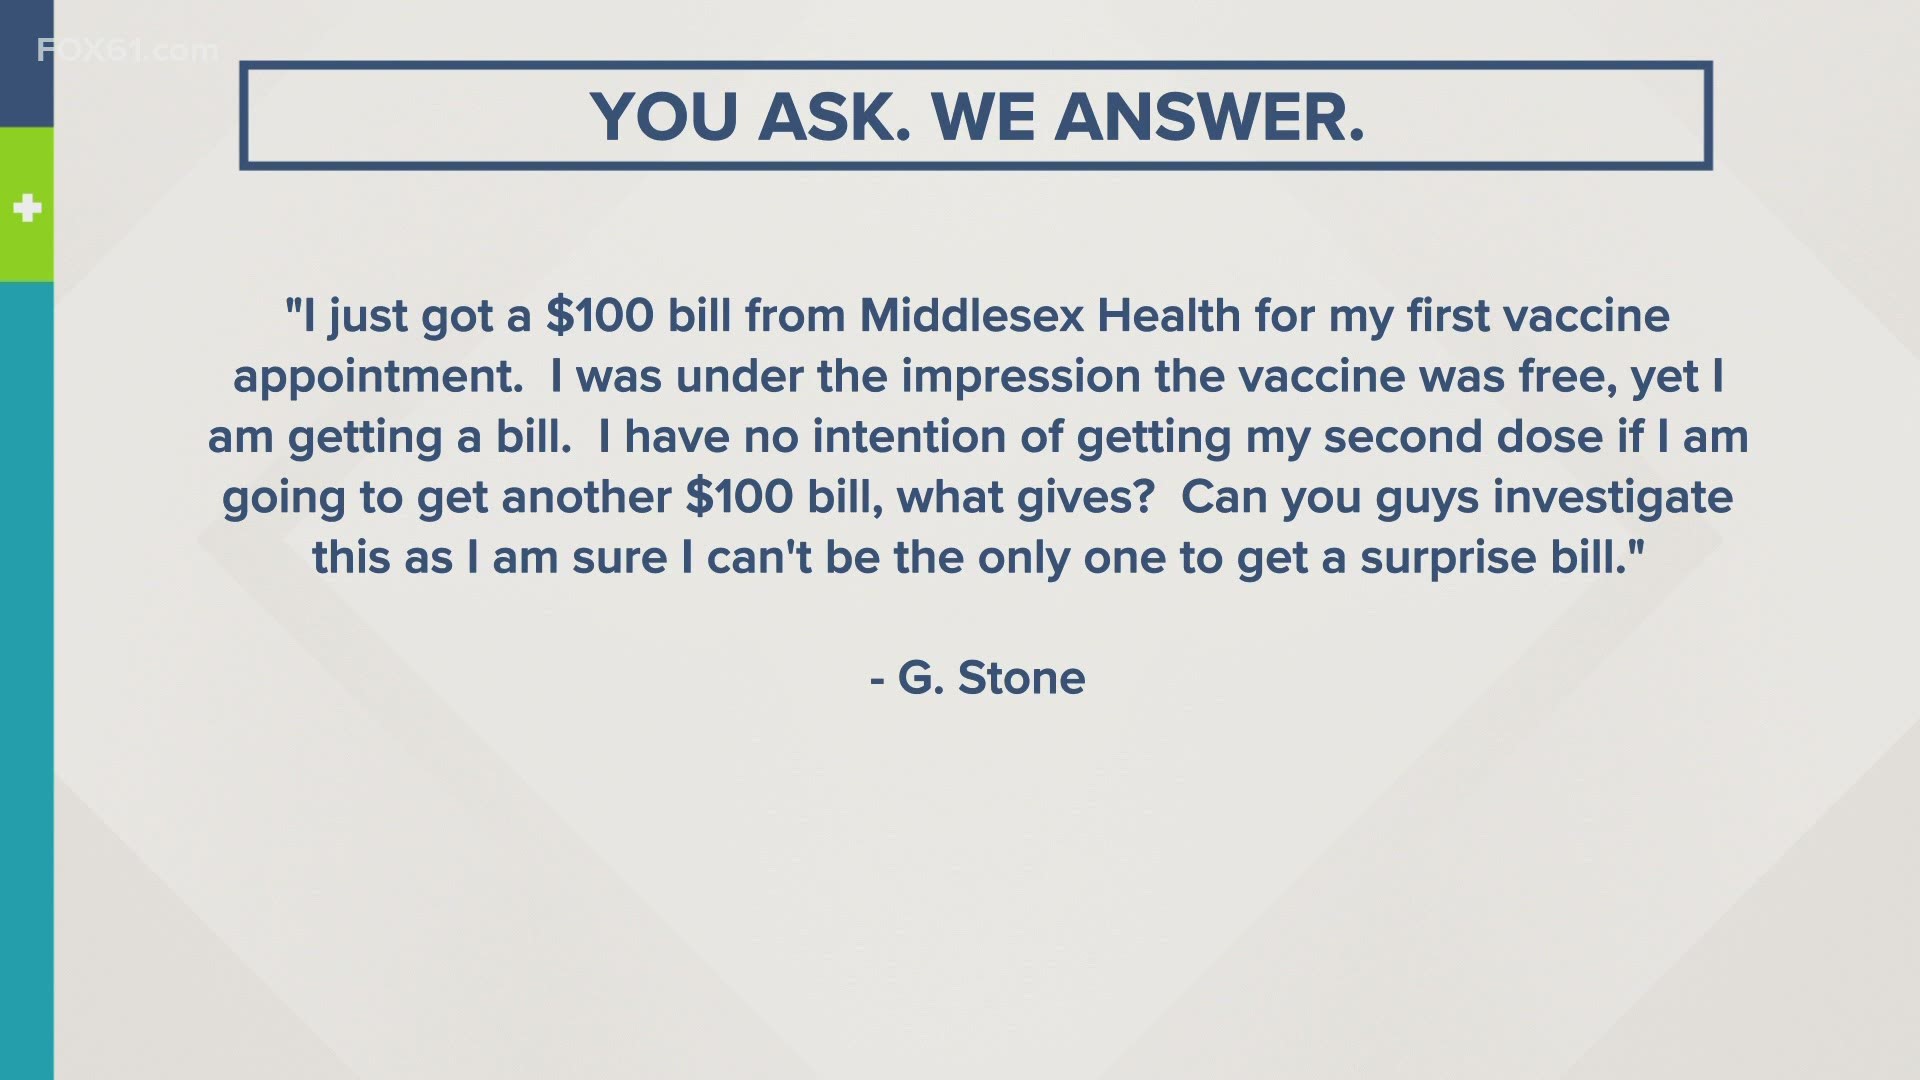 I just got a $100 bill from Middlesex Health for my first vaccine appointment.